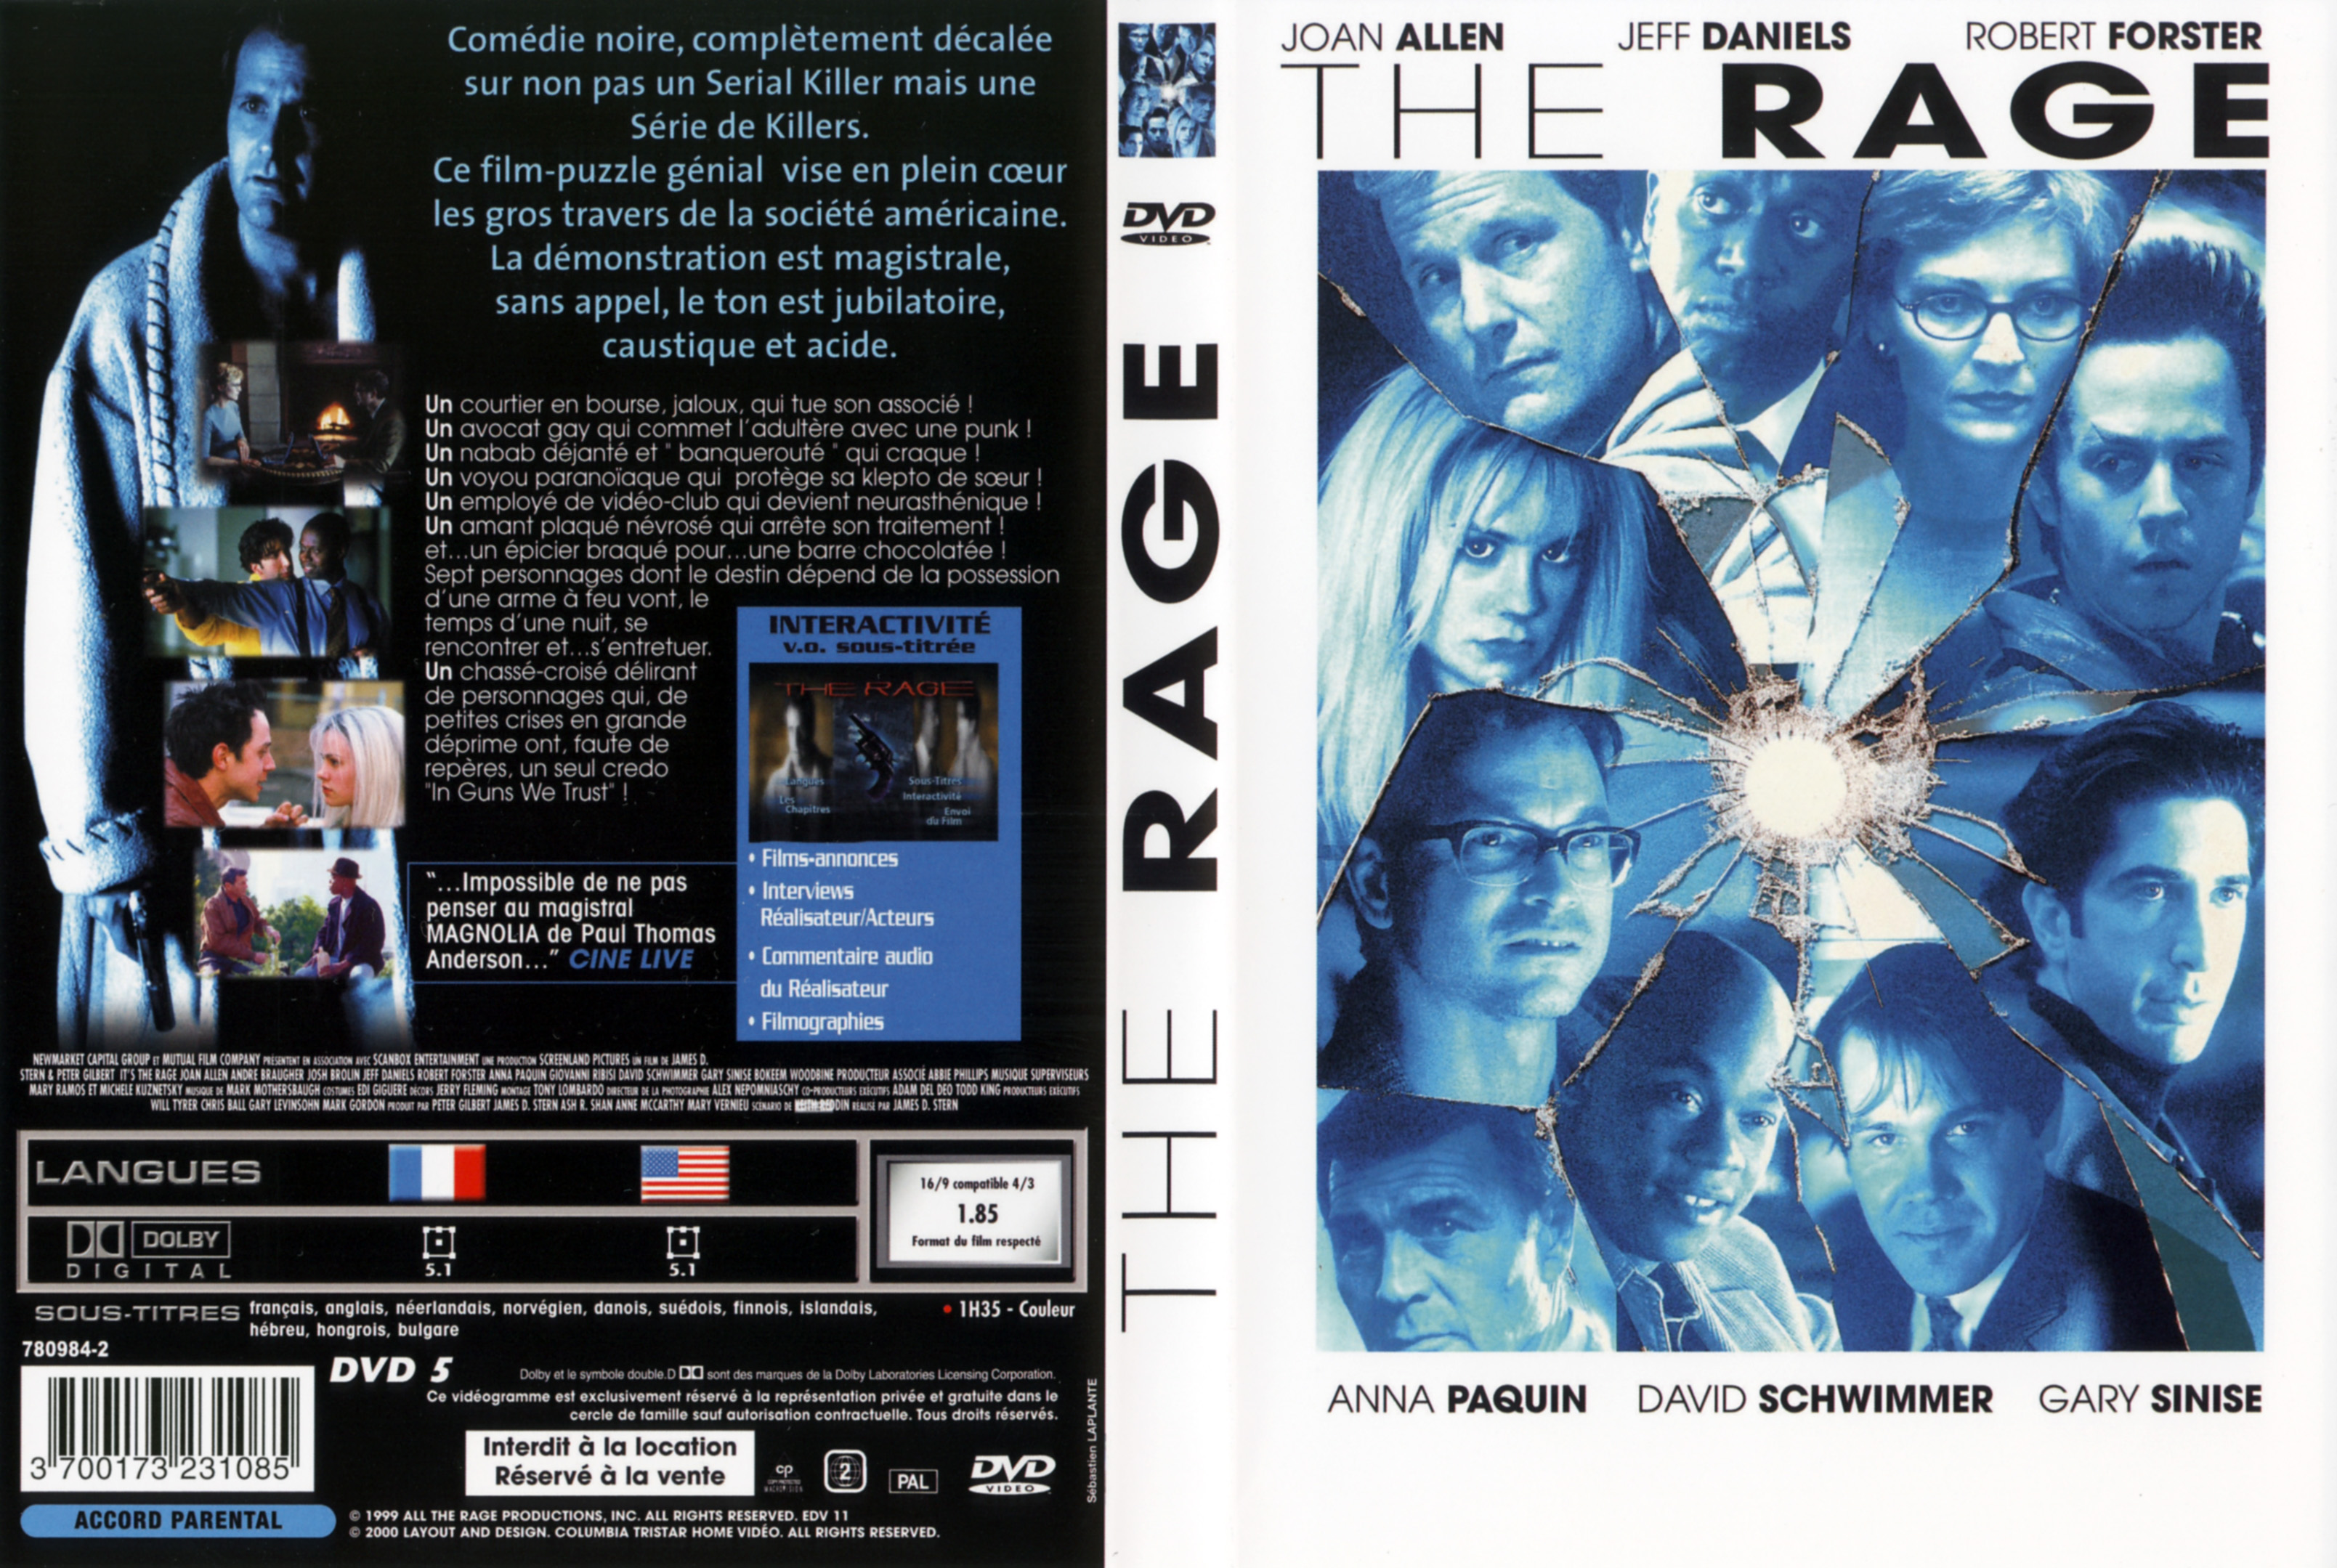 Jaquette DVD The rage (1999)